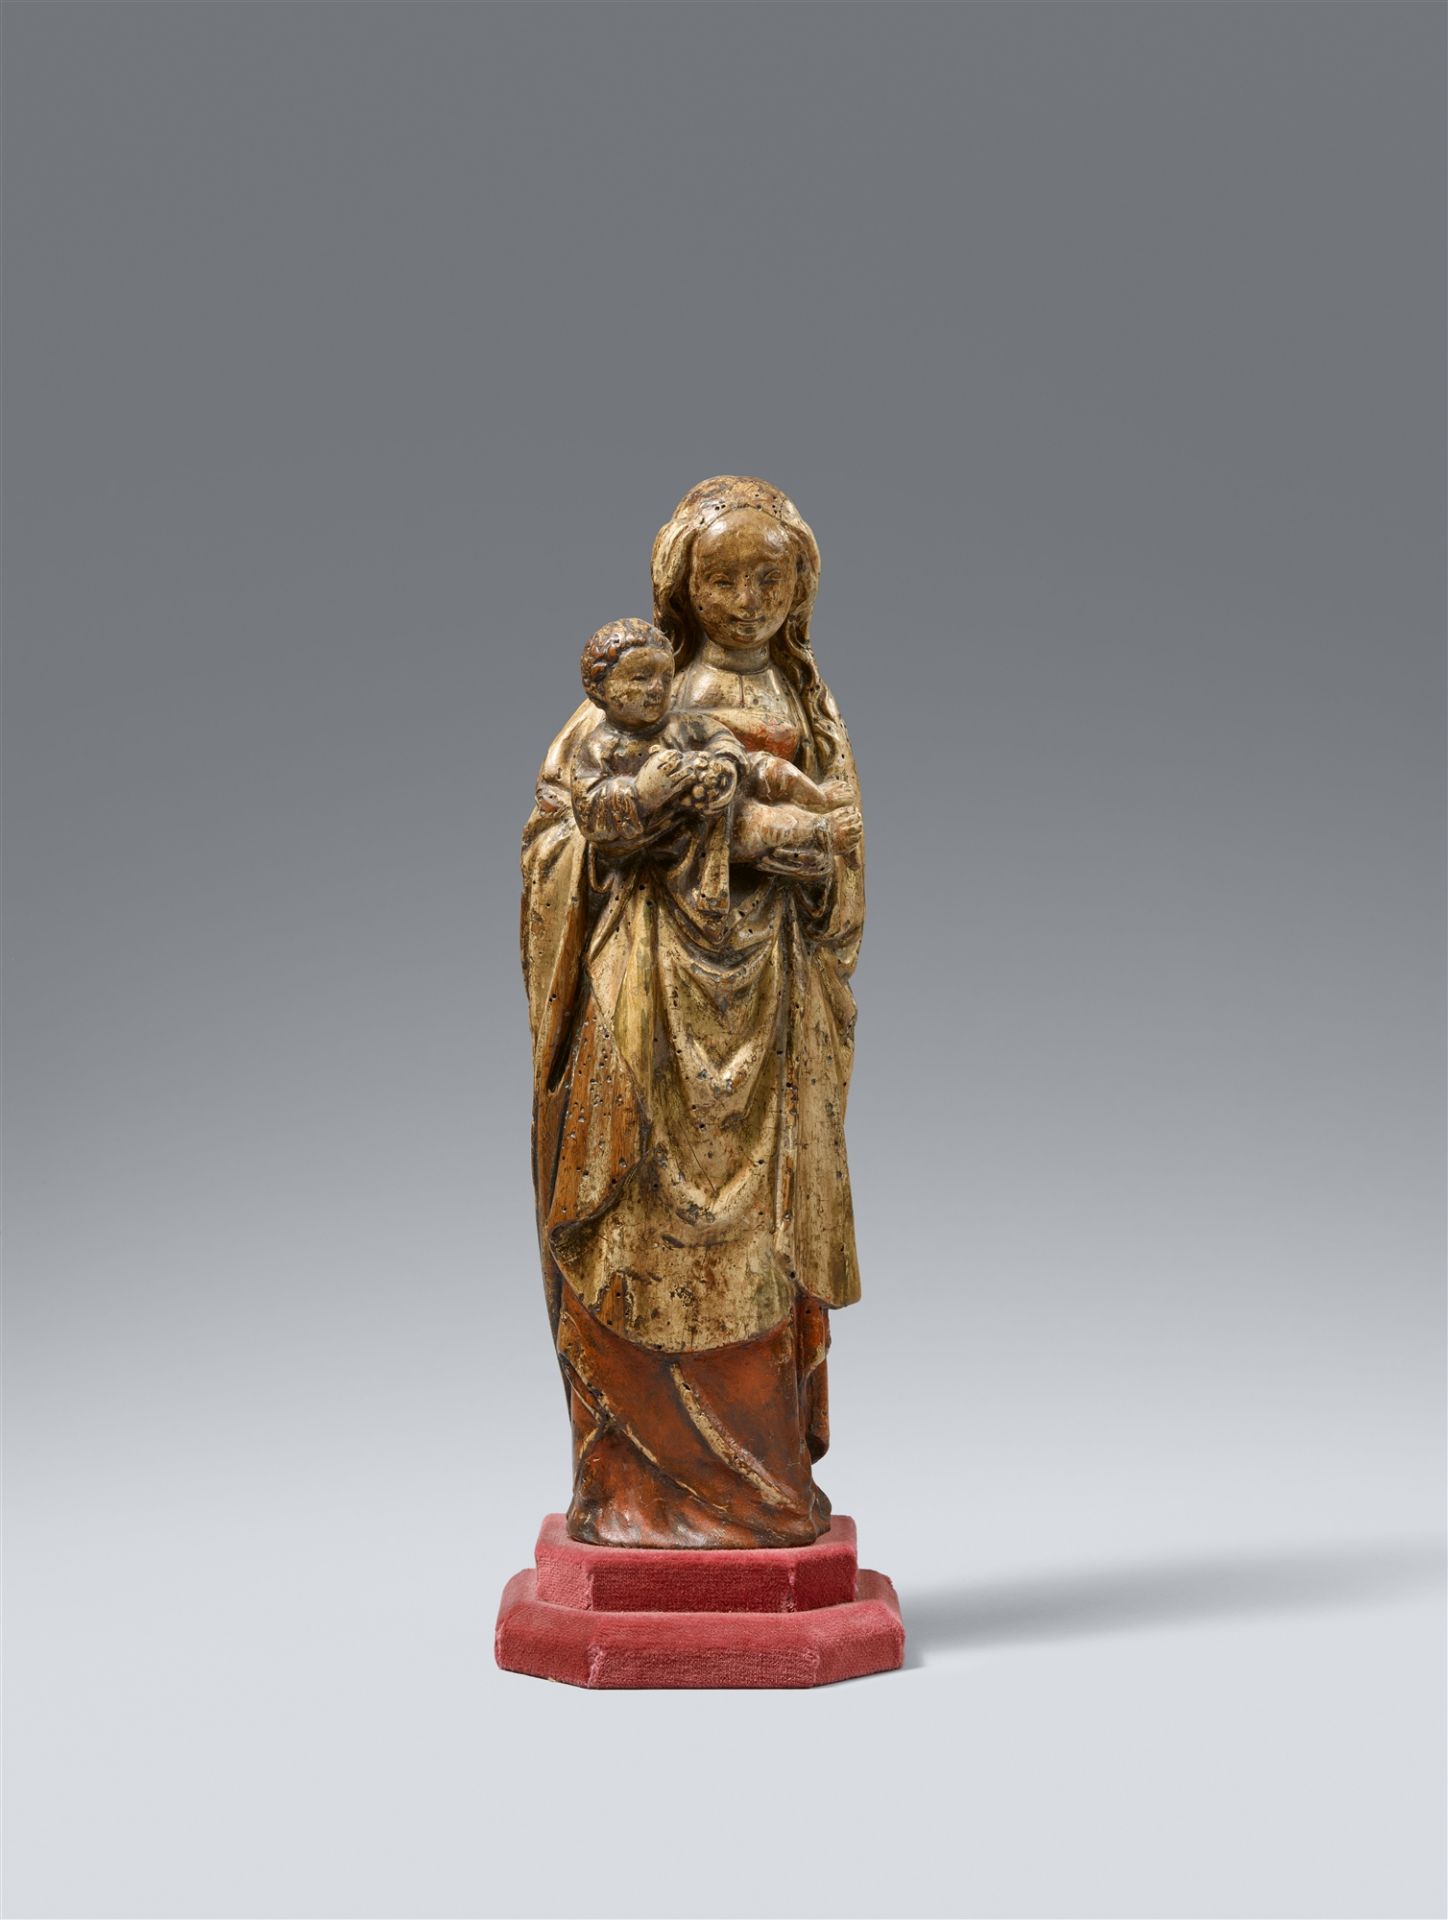 An early 16th century Mechelen carved figure of the Virgin and Child